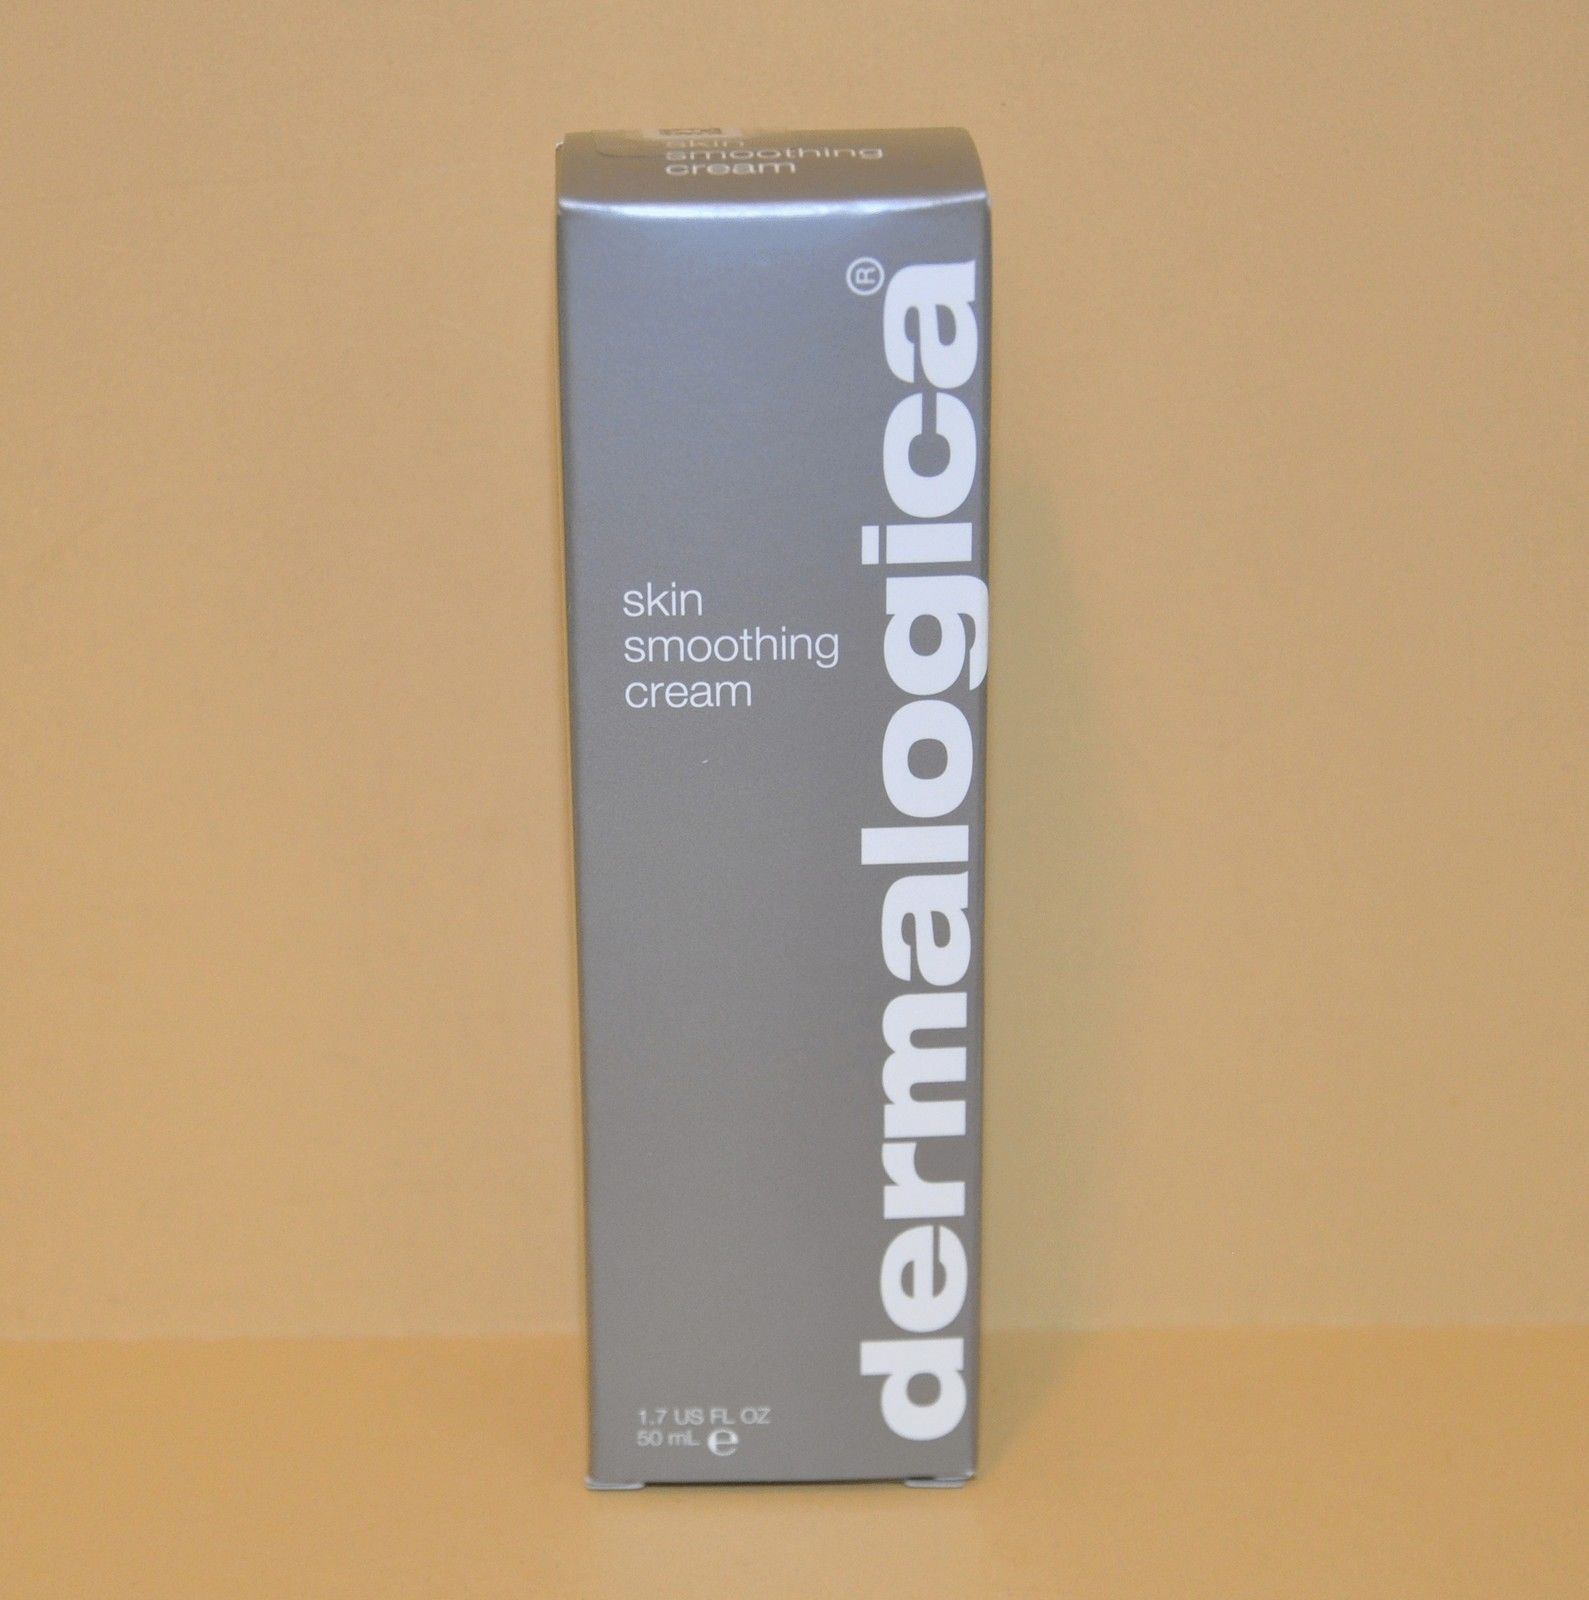 Primary image for Dermalogica Skin Smoothing Cream 50ml/1.7fl.oz. New in box